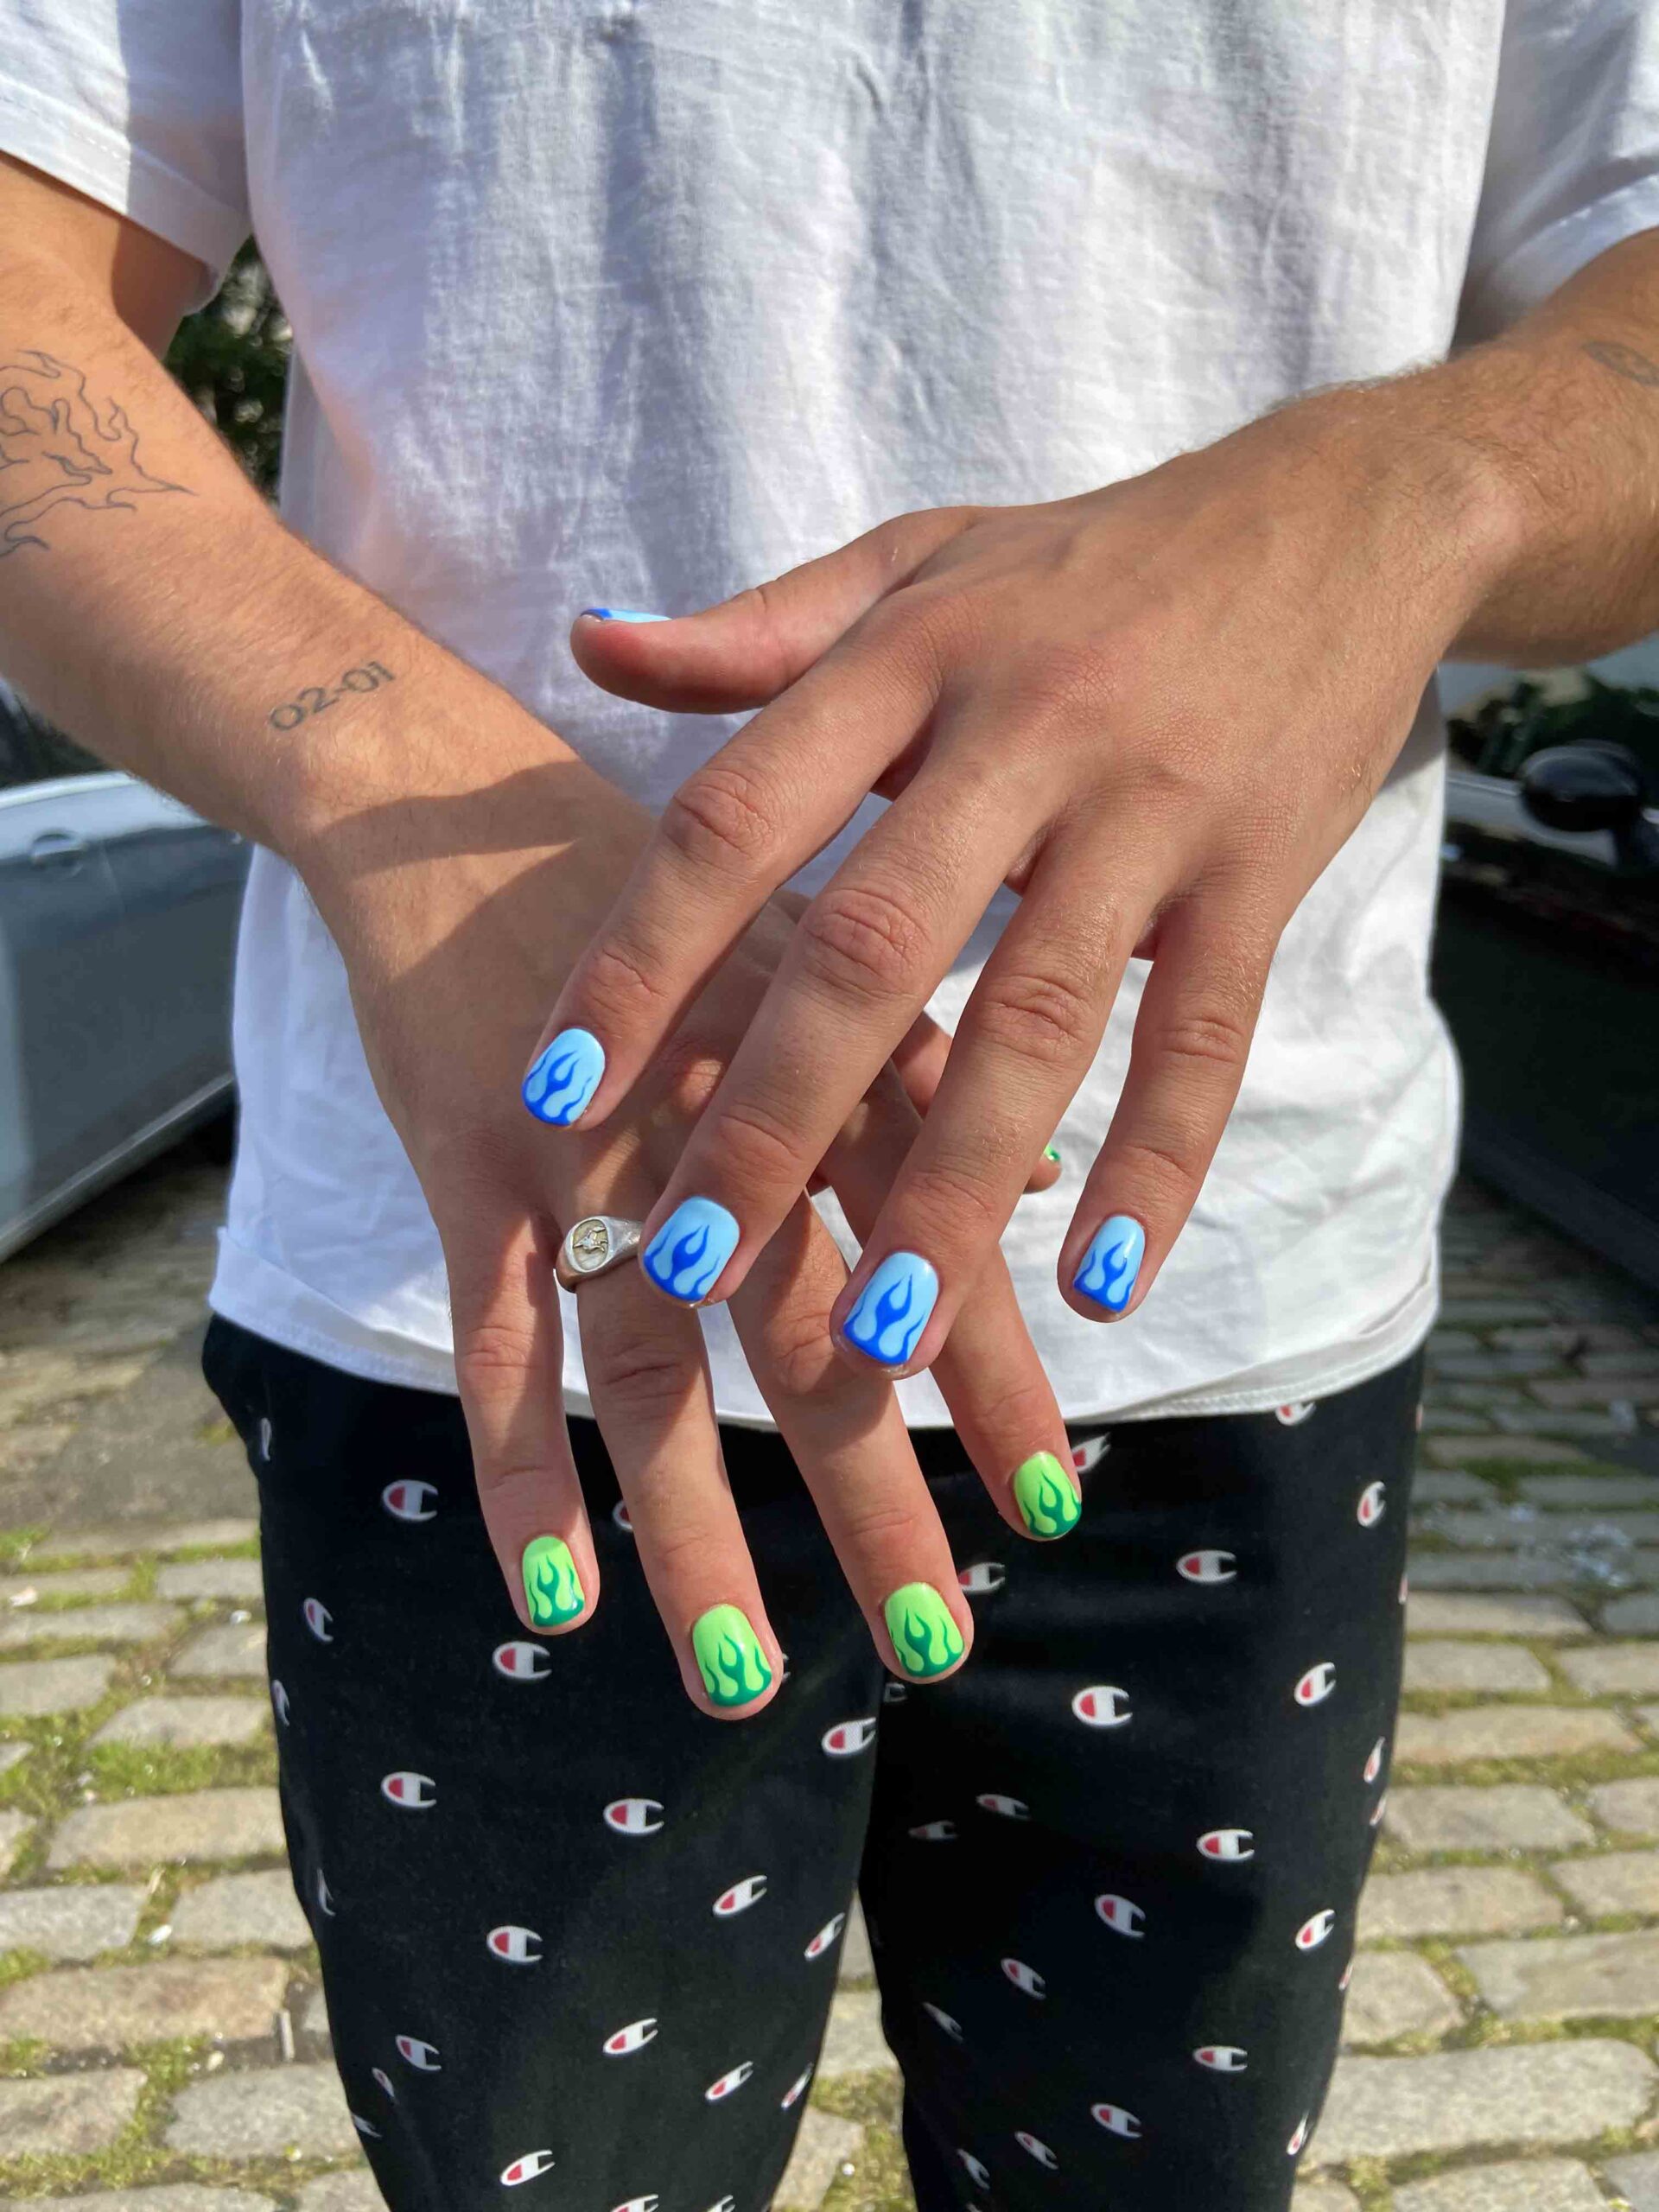 Male manicures are redefining gender-neutral beauty one coat at a time